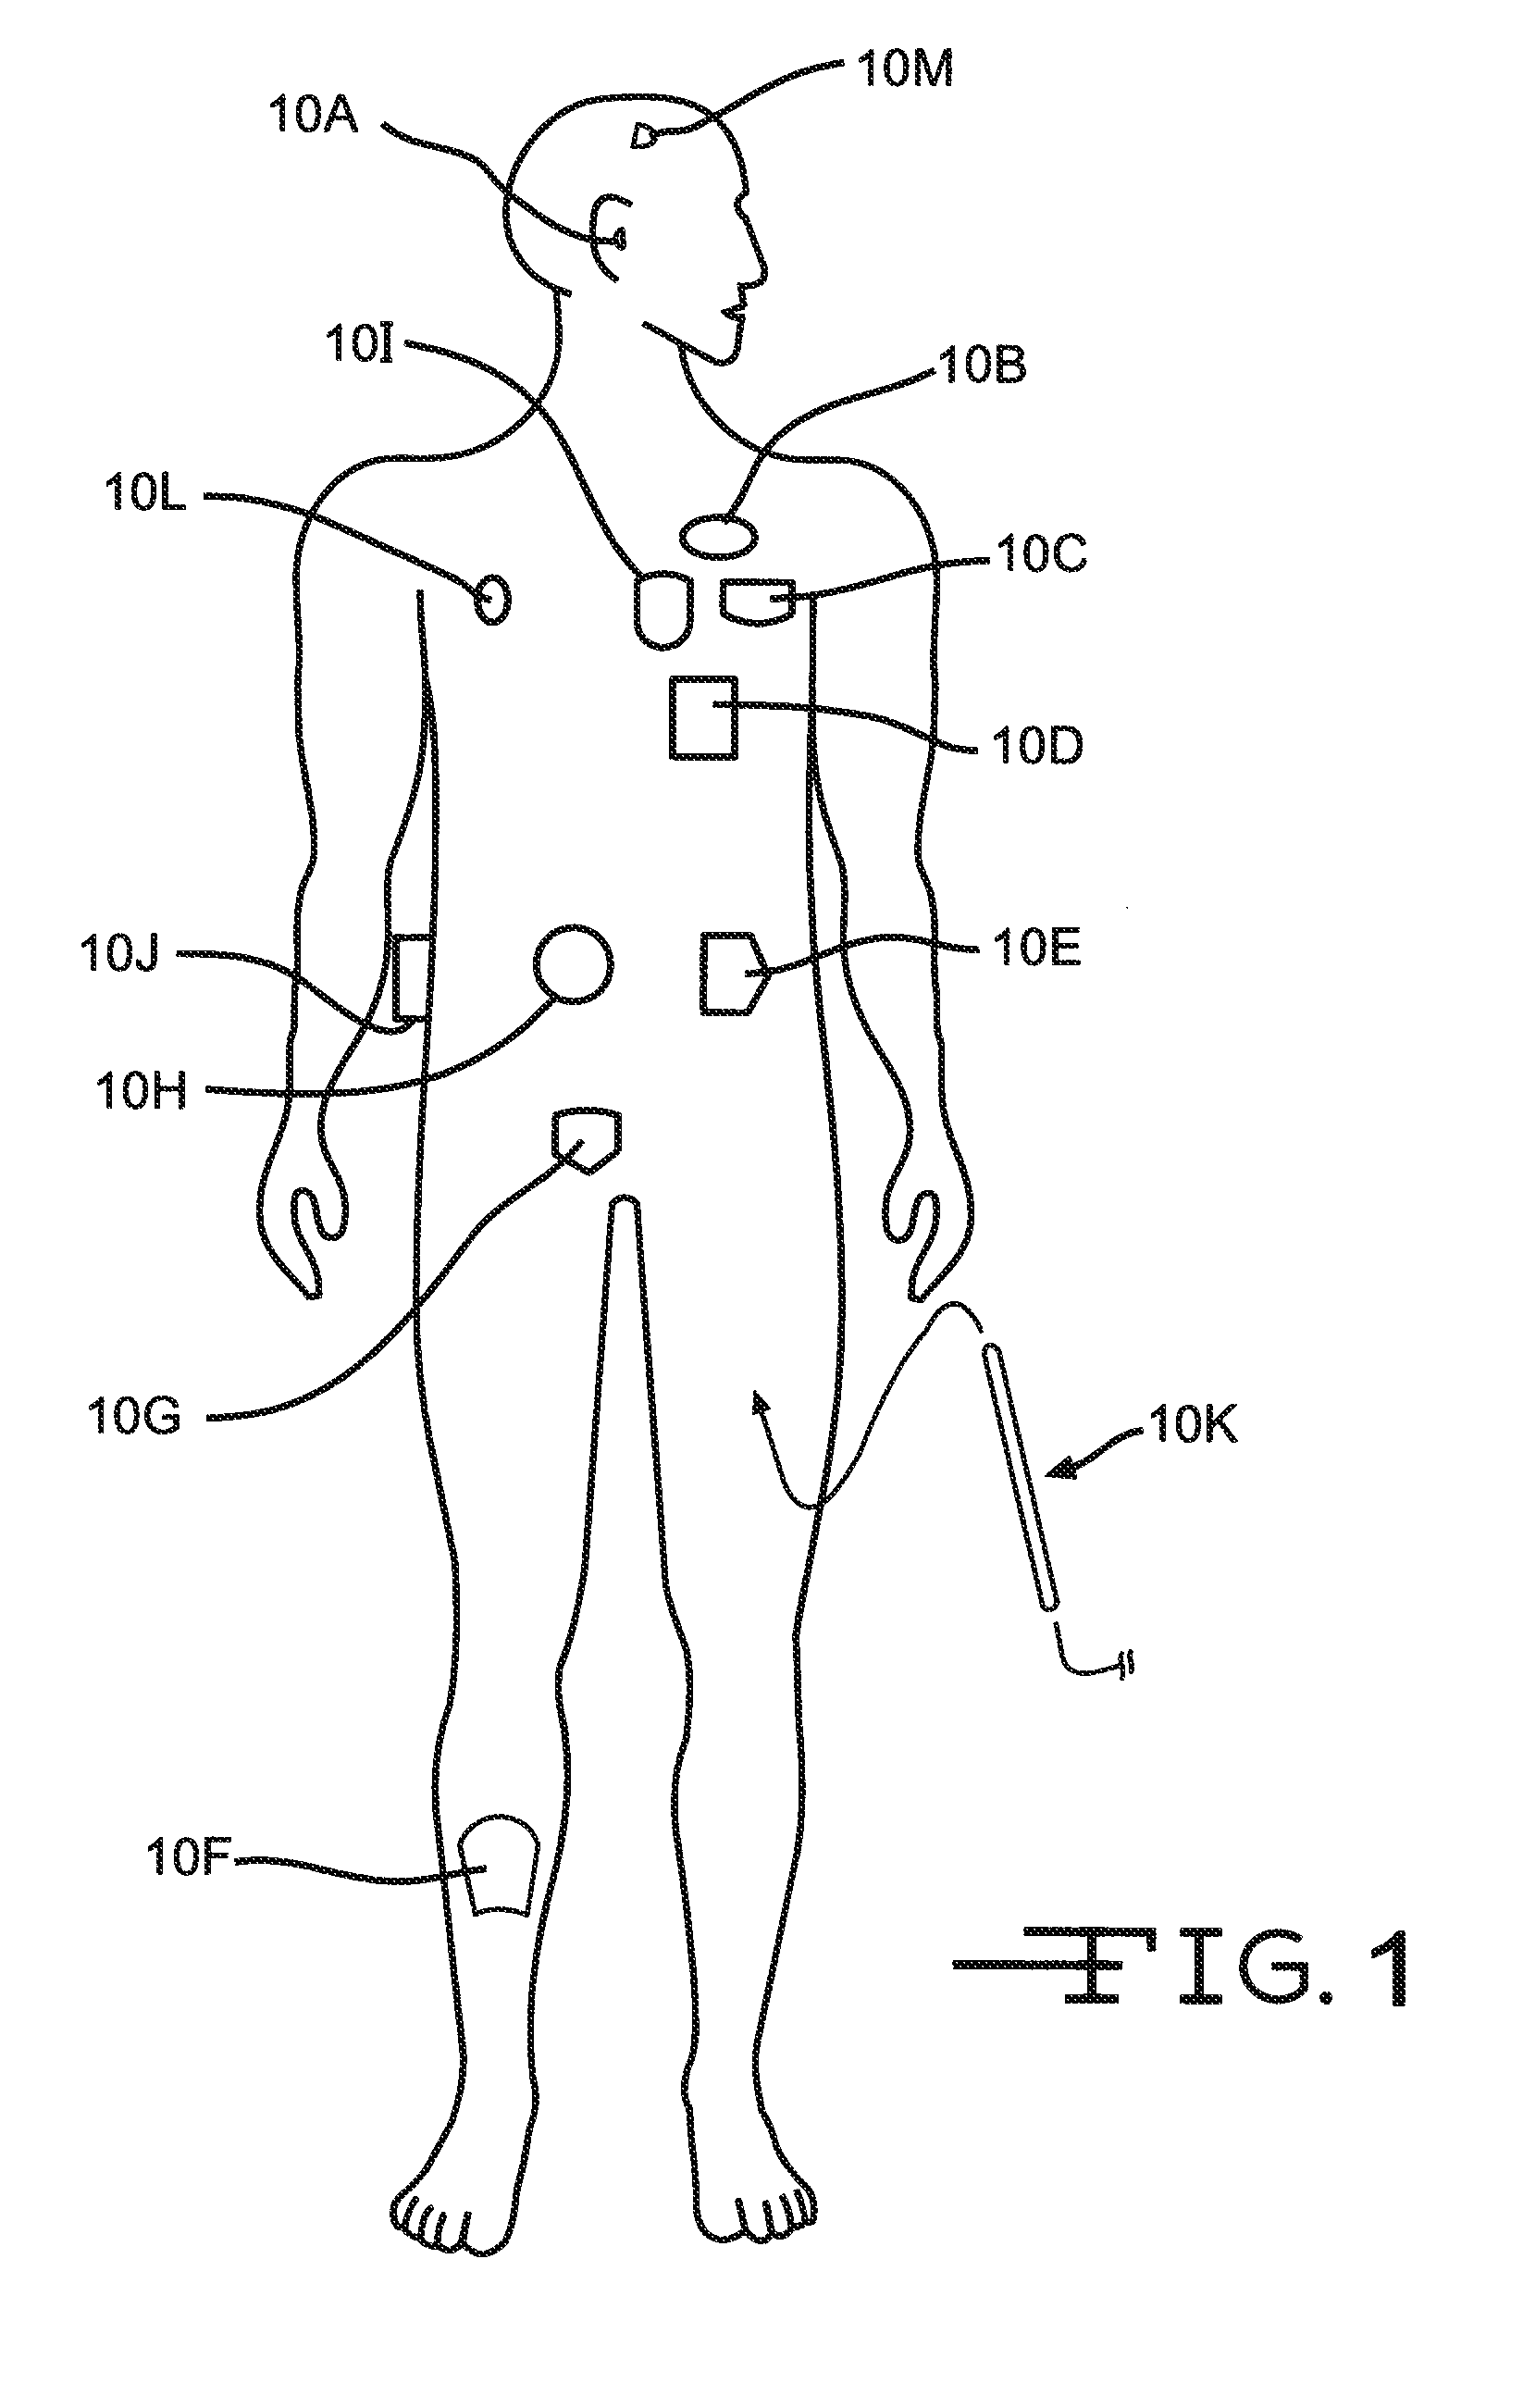 Positioning of a medical device conductor in an MRI environment to reduce RF induced current